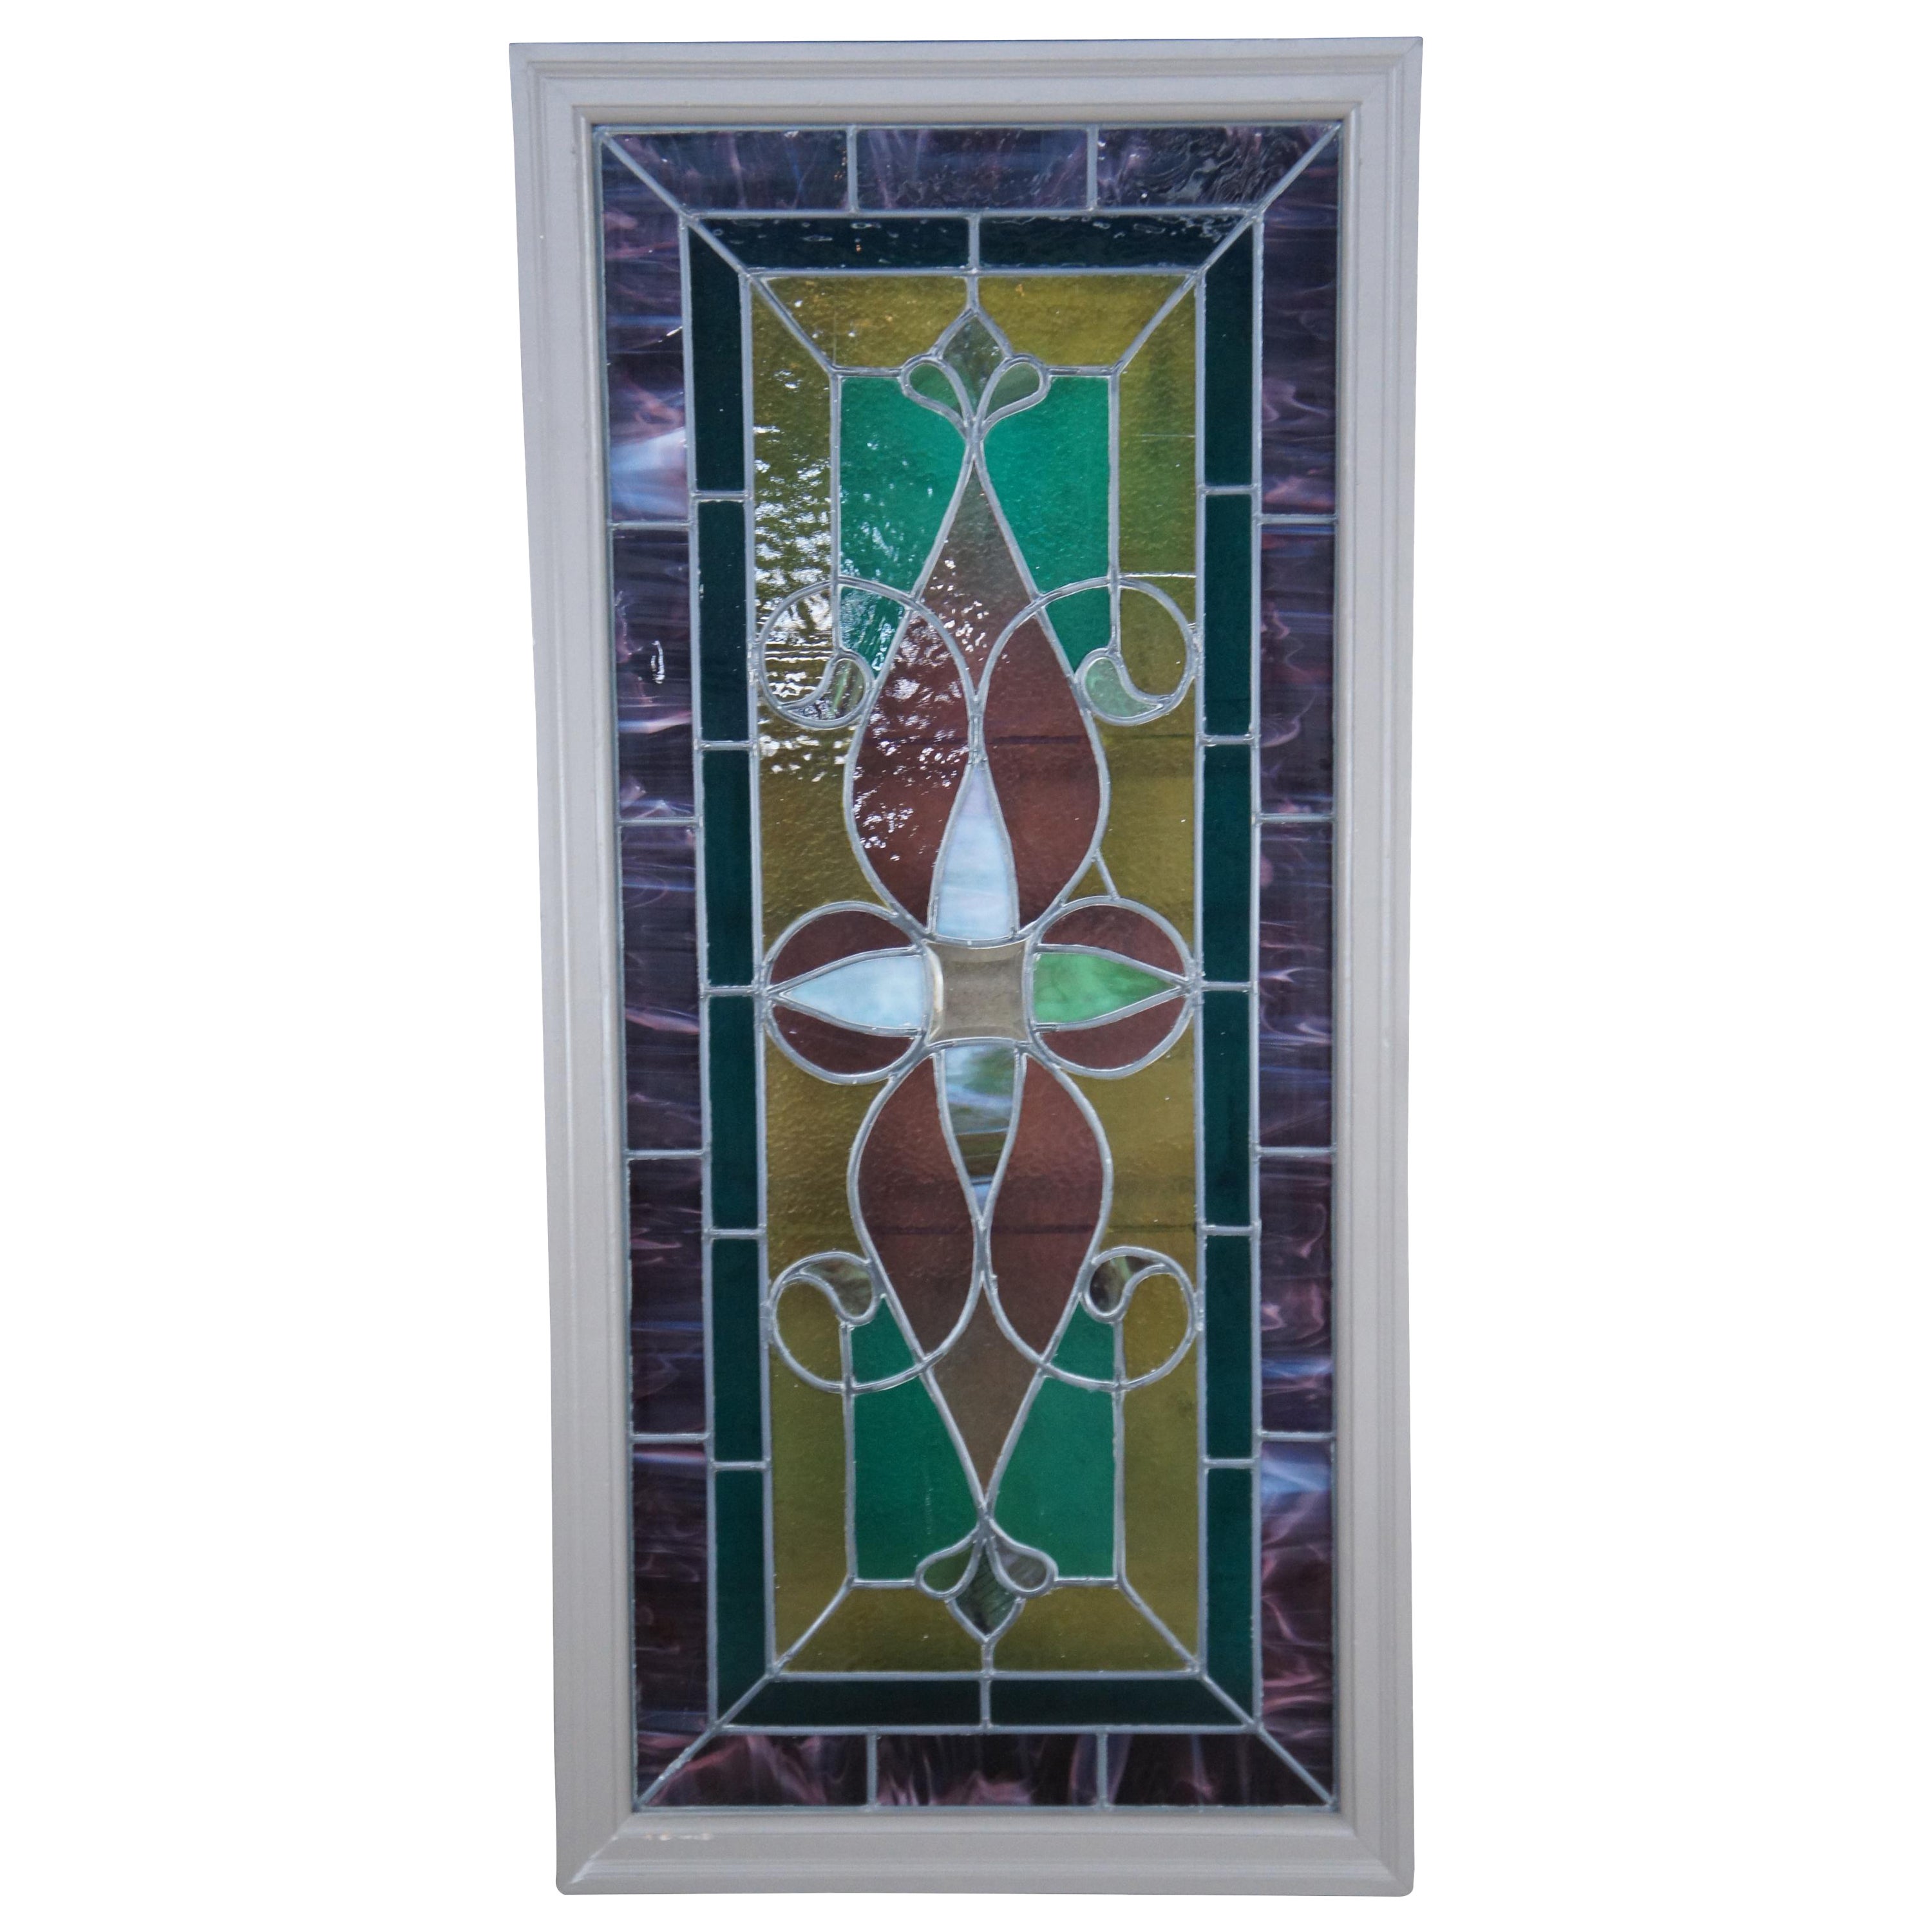 OLD ENGLISH LEADED STAINED GLASS WINDOW TRANSOM Double Diamond 28.75" x 18.25" 